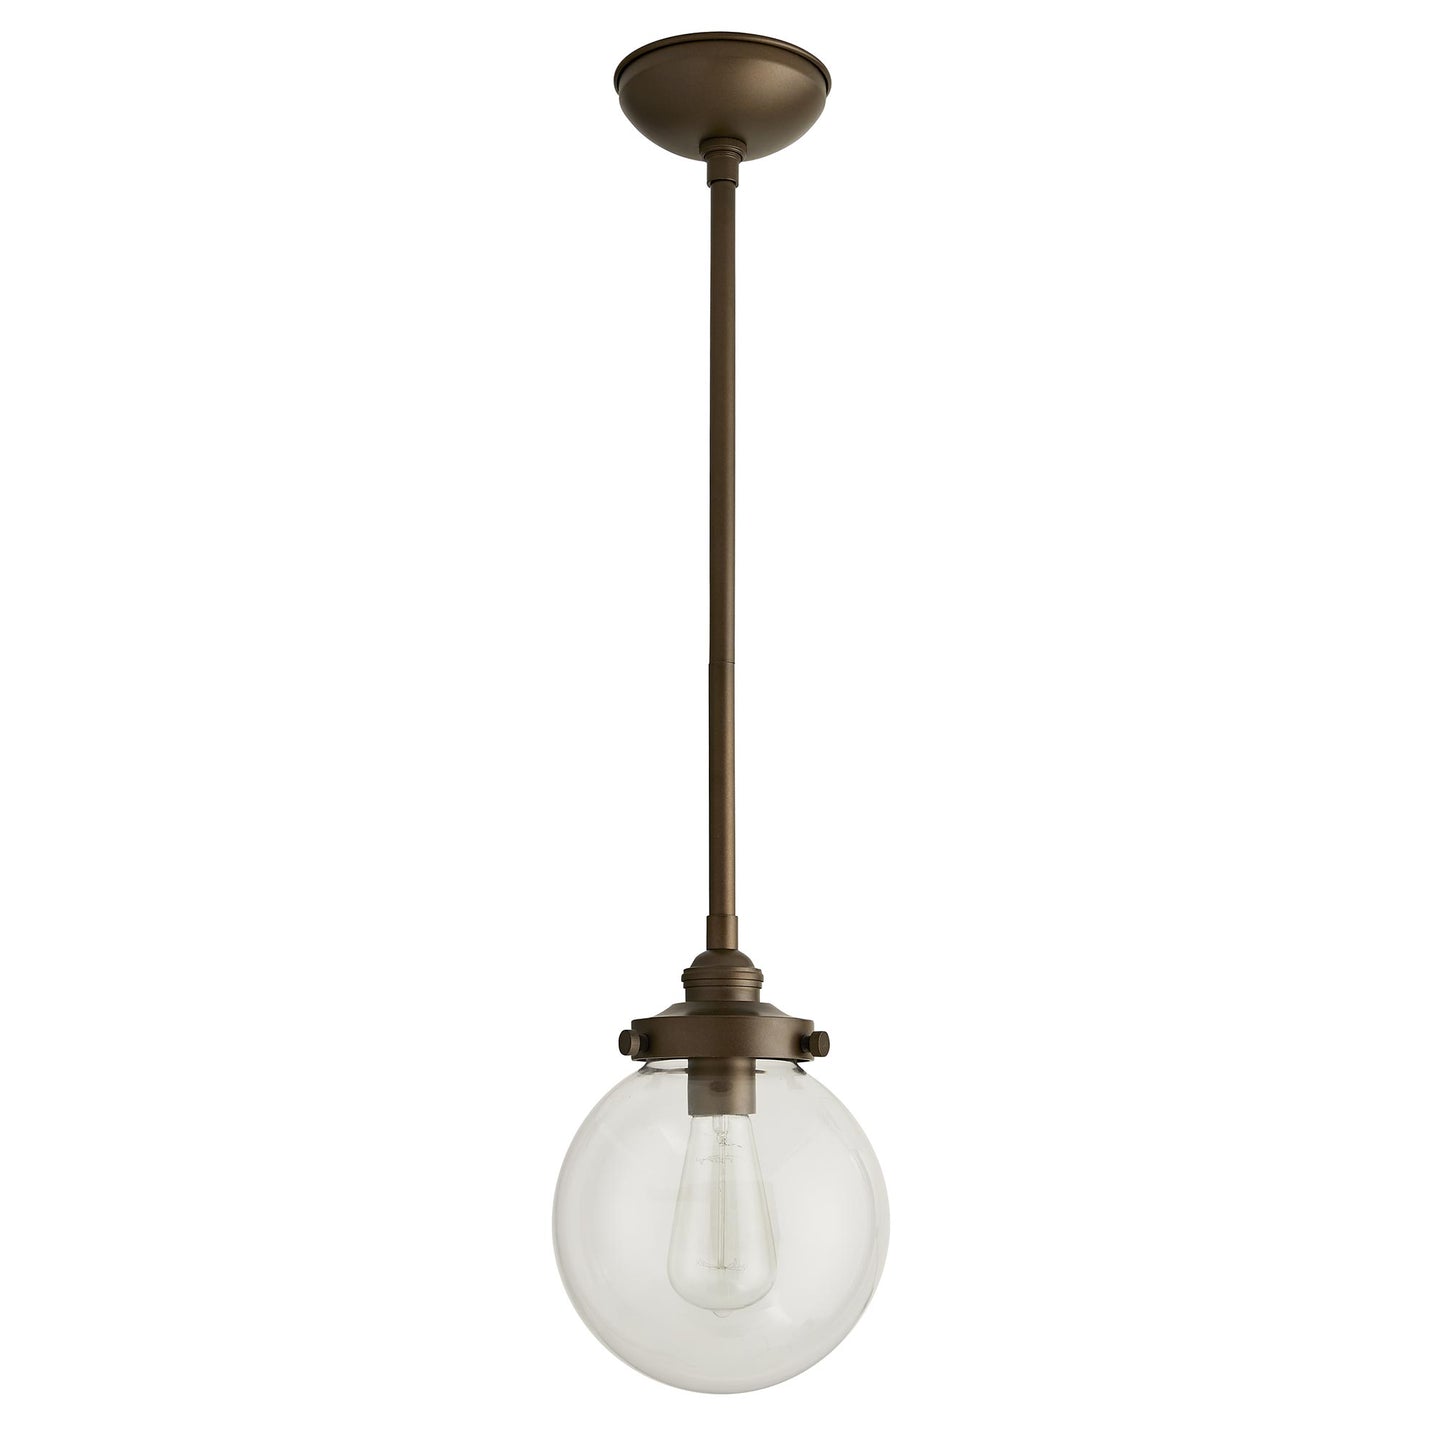 Reeves Small Outdoor Pendant - Contemporary Hanging Light Fixture for Outdoor Spaces